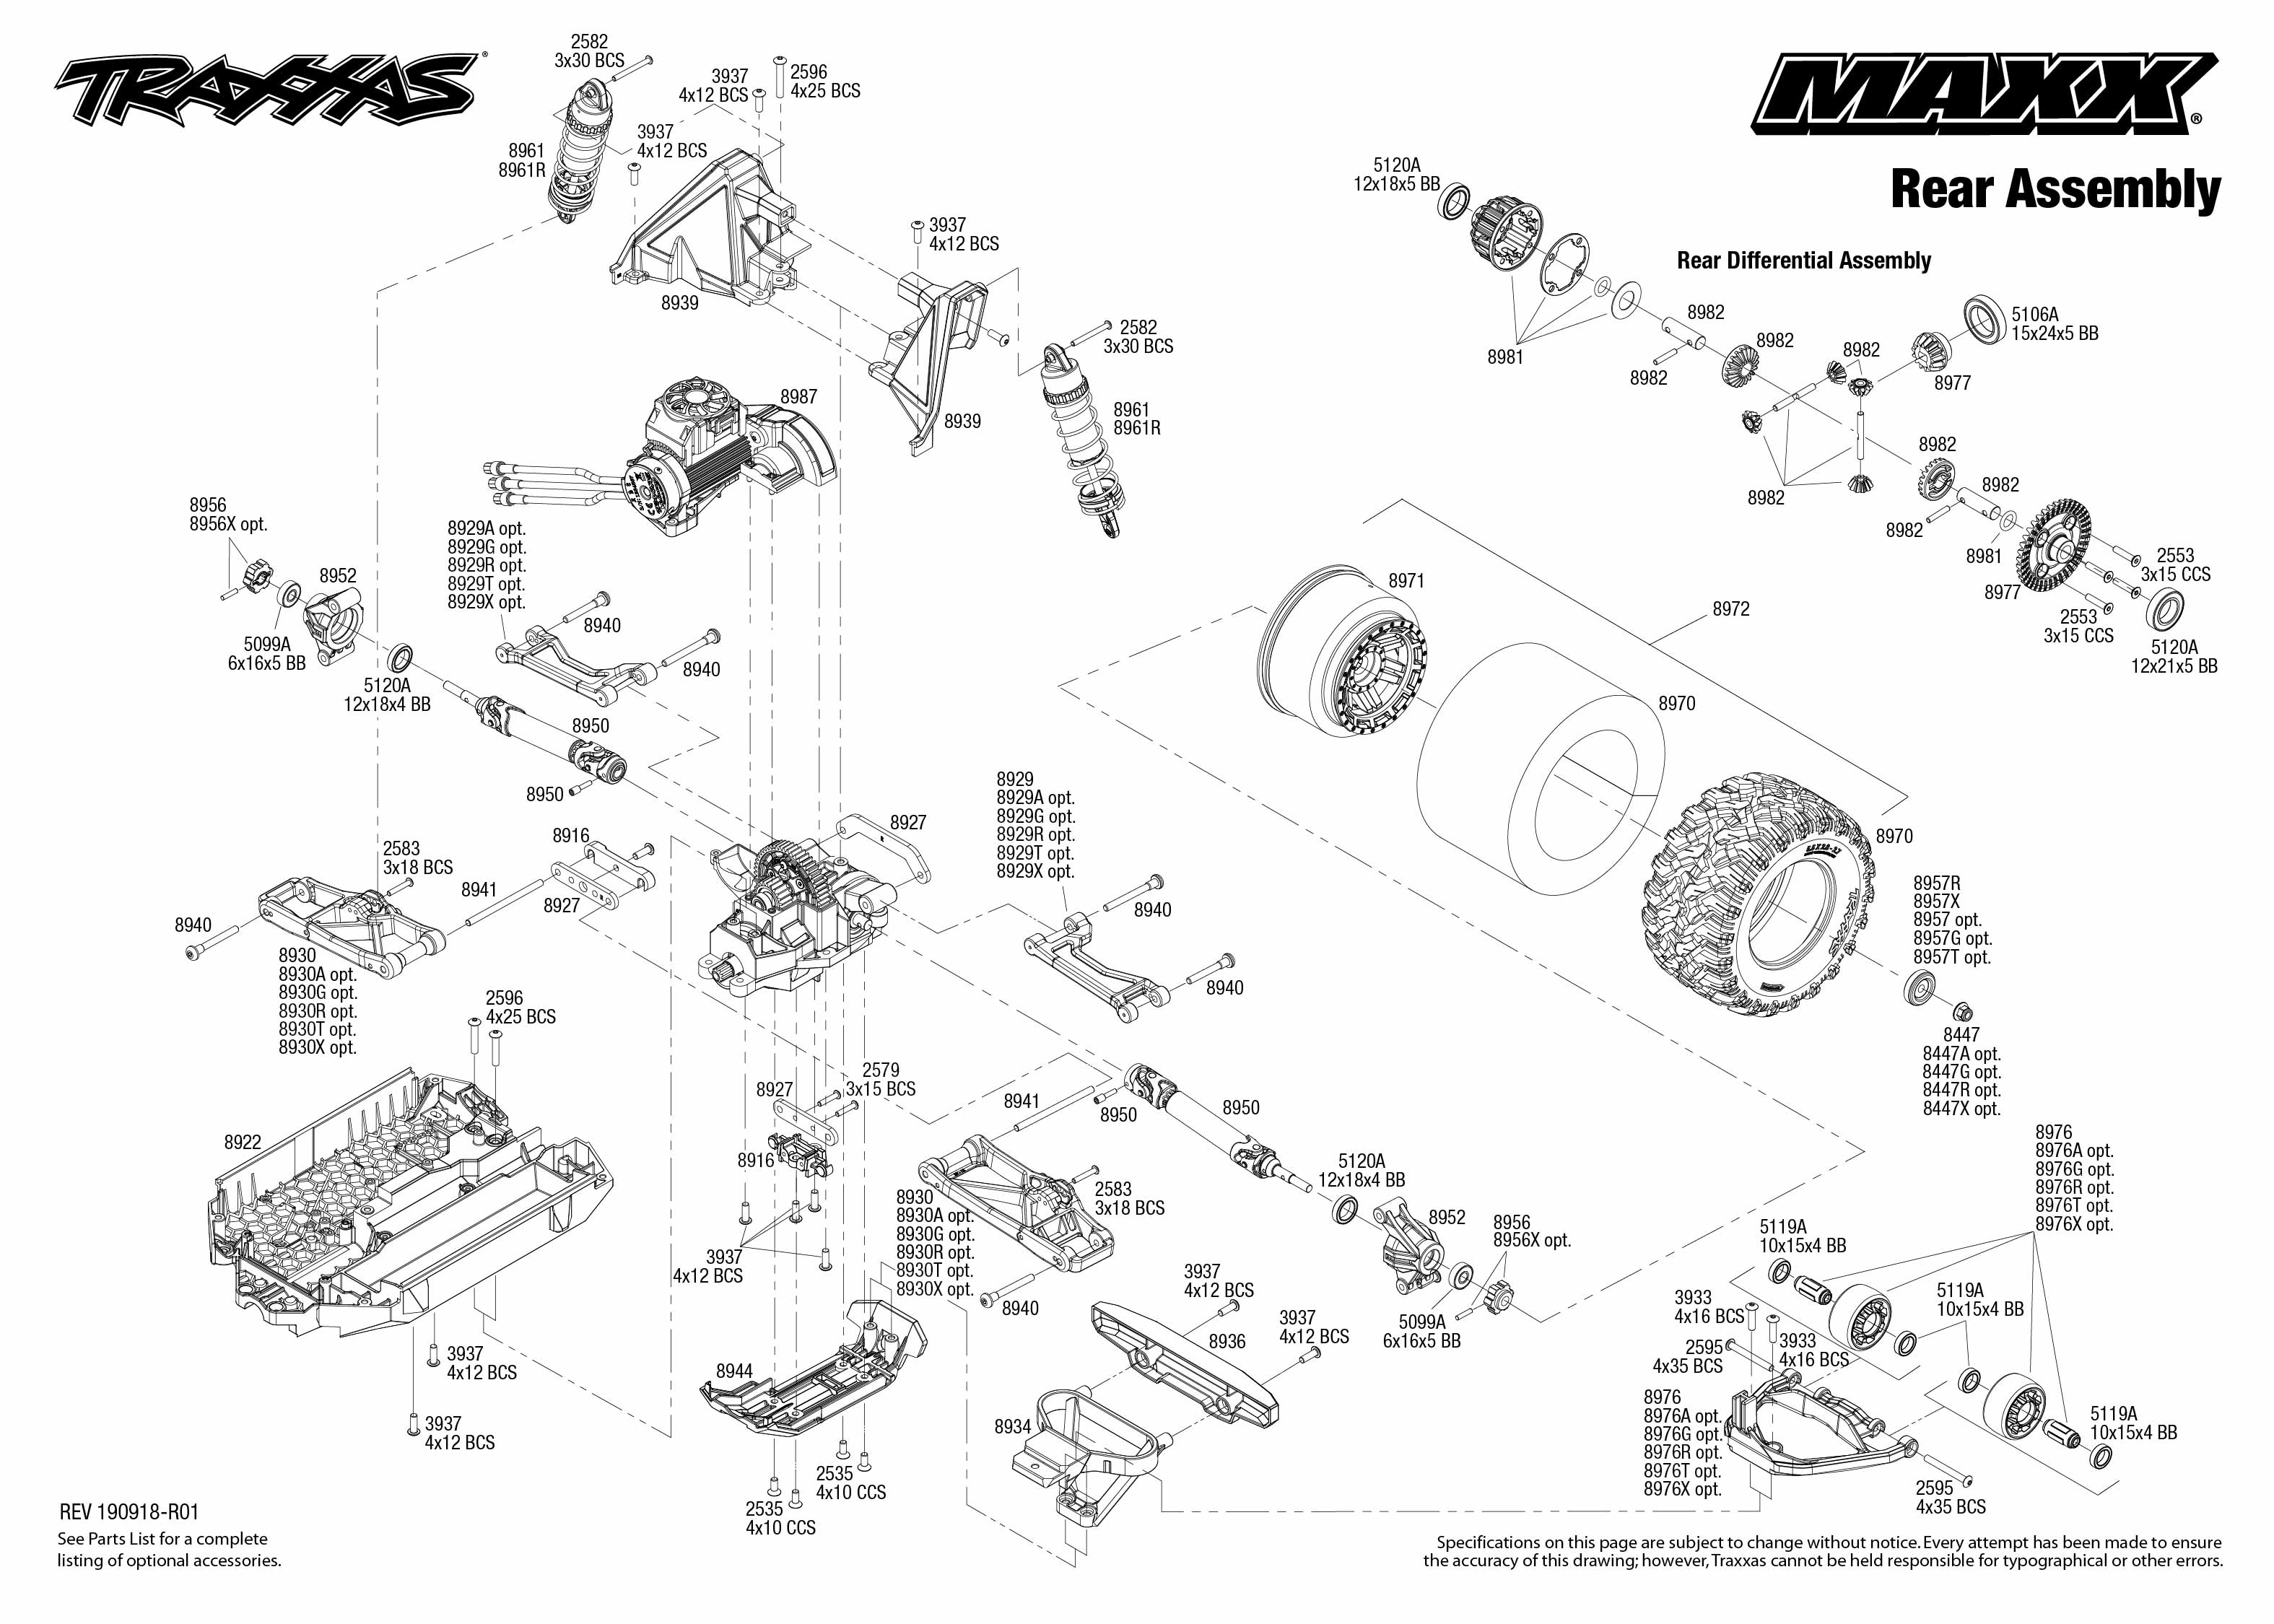 Exploded View Traxxas Maxx 1 8 4wd Tqi Rtr Rear Part Astra.